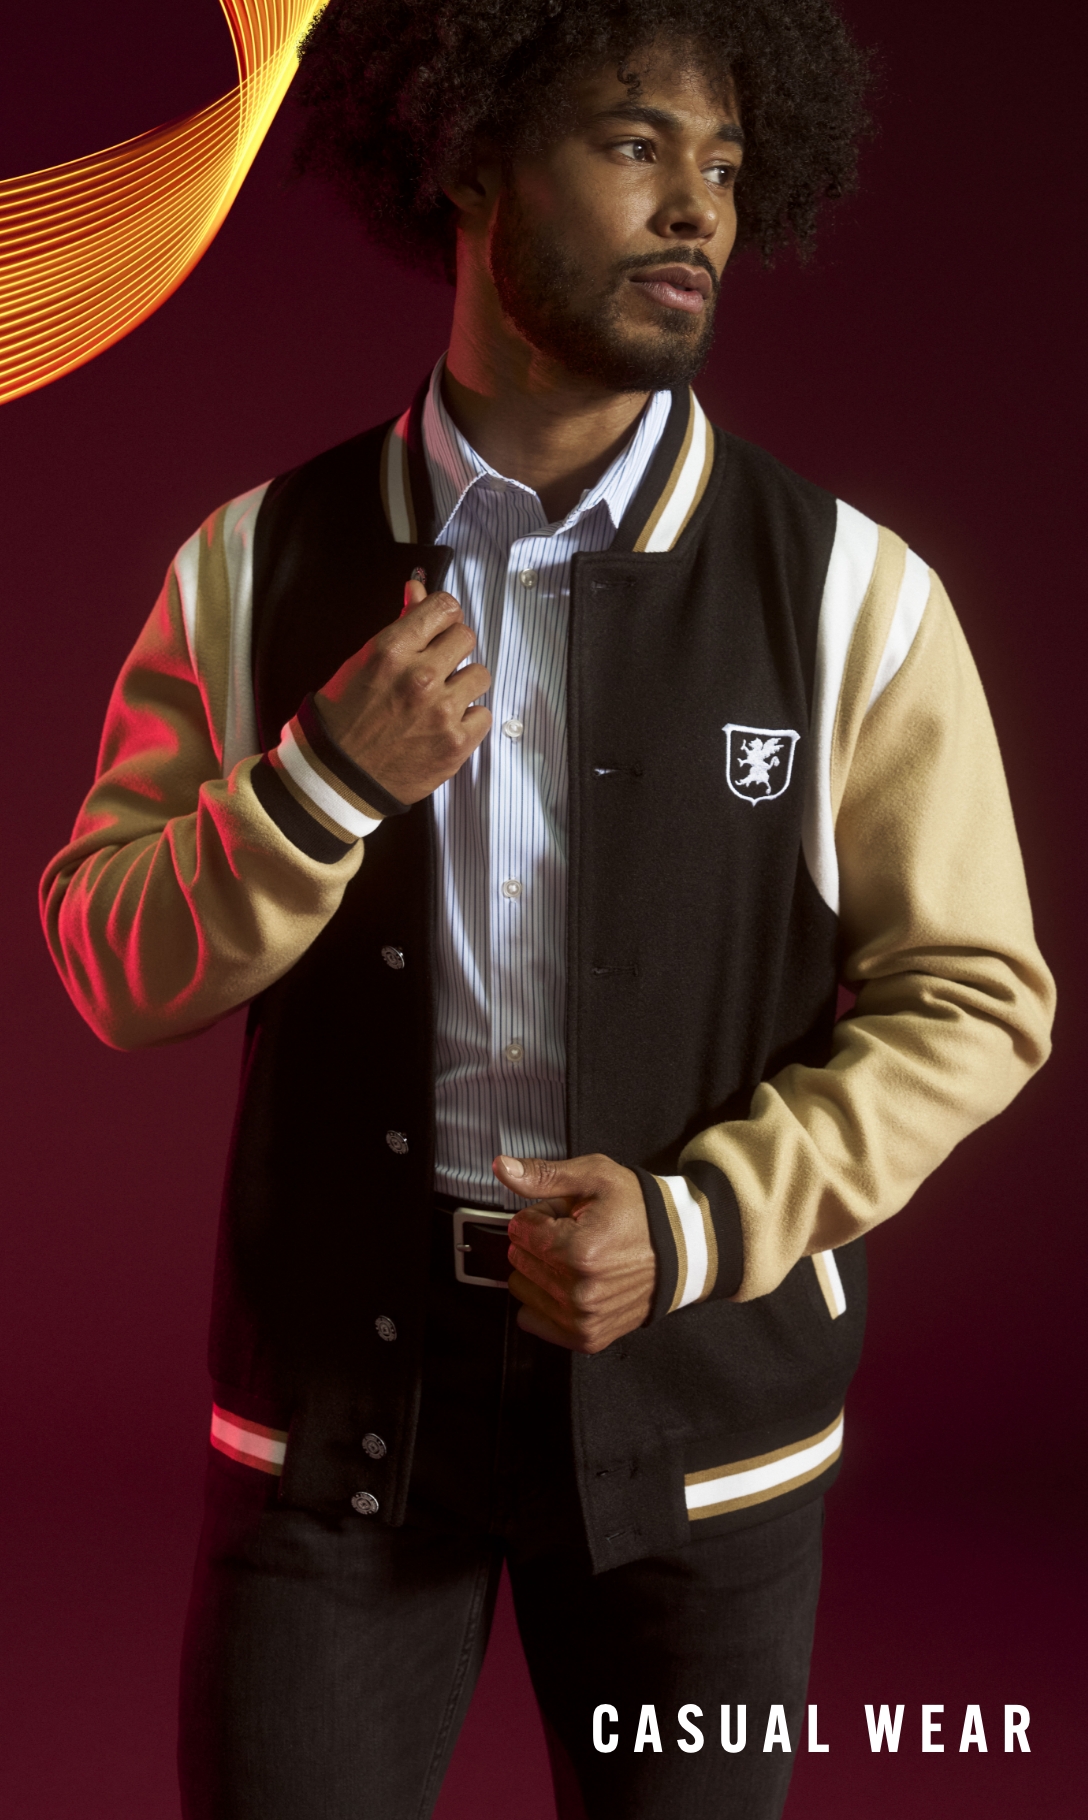 Men's Casual Wear category. Image features a Stacy Adams Varsity jacket.